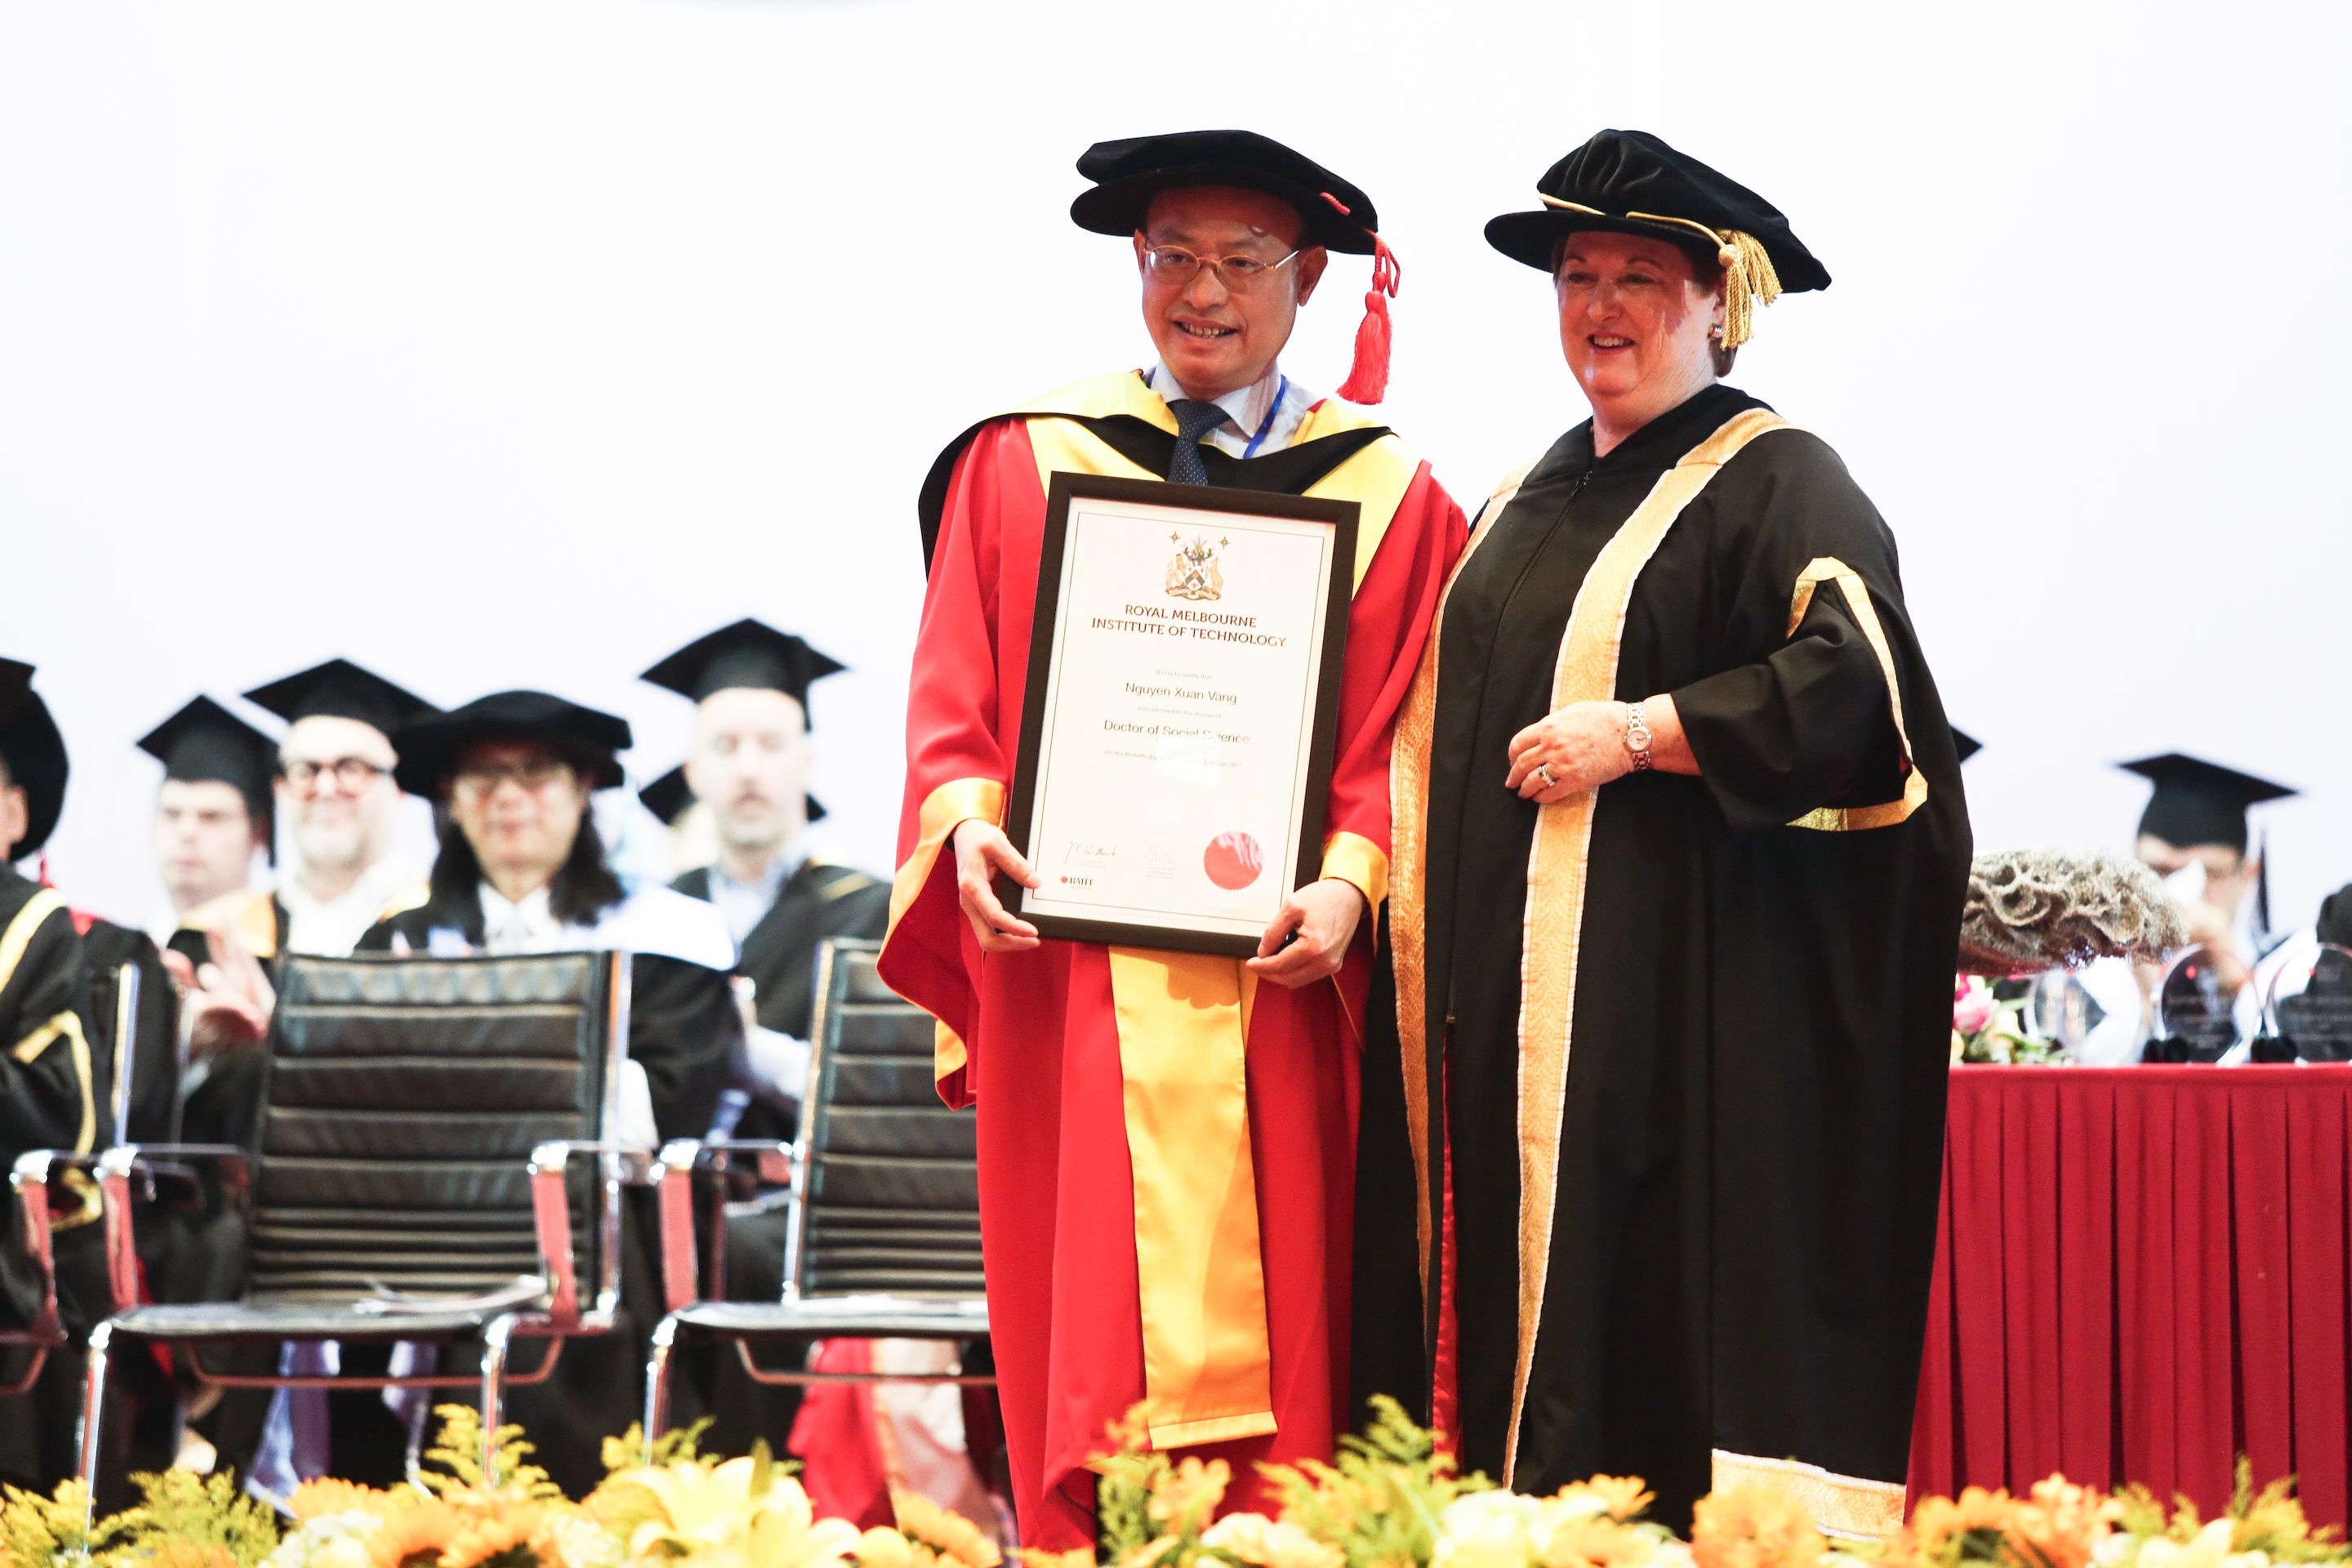 Mr Nguyen Xuan Vang received an Honorary Doctorate from Deputy Chancellor of RMIT University, Ms Janet Latchford.